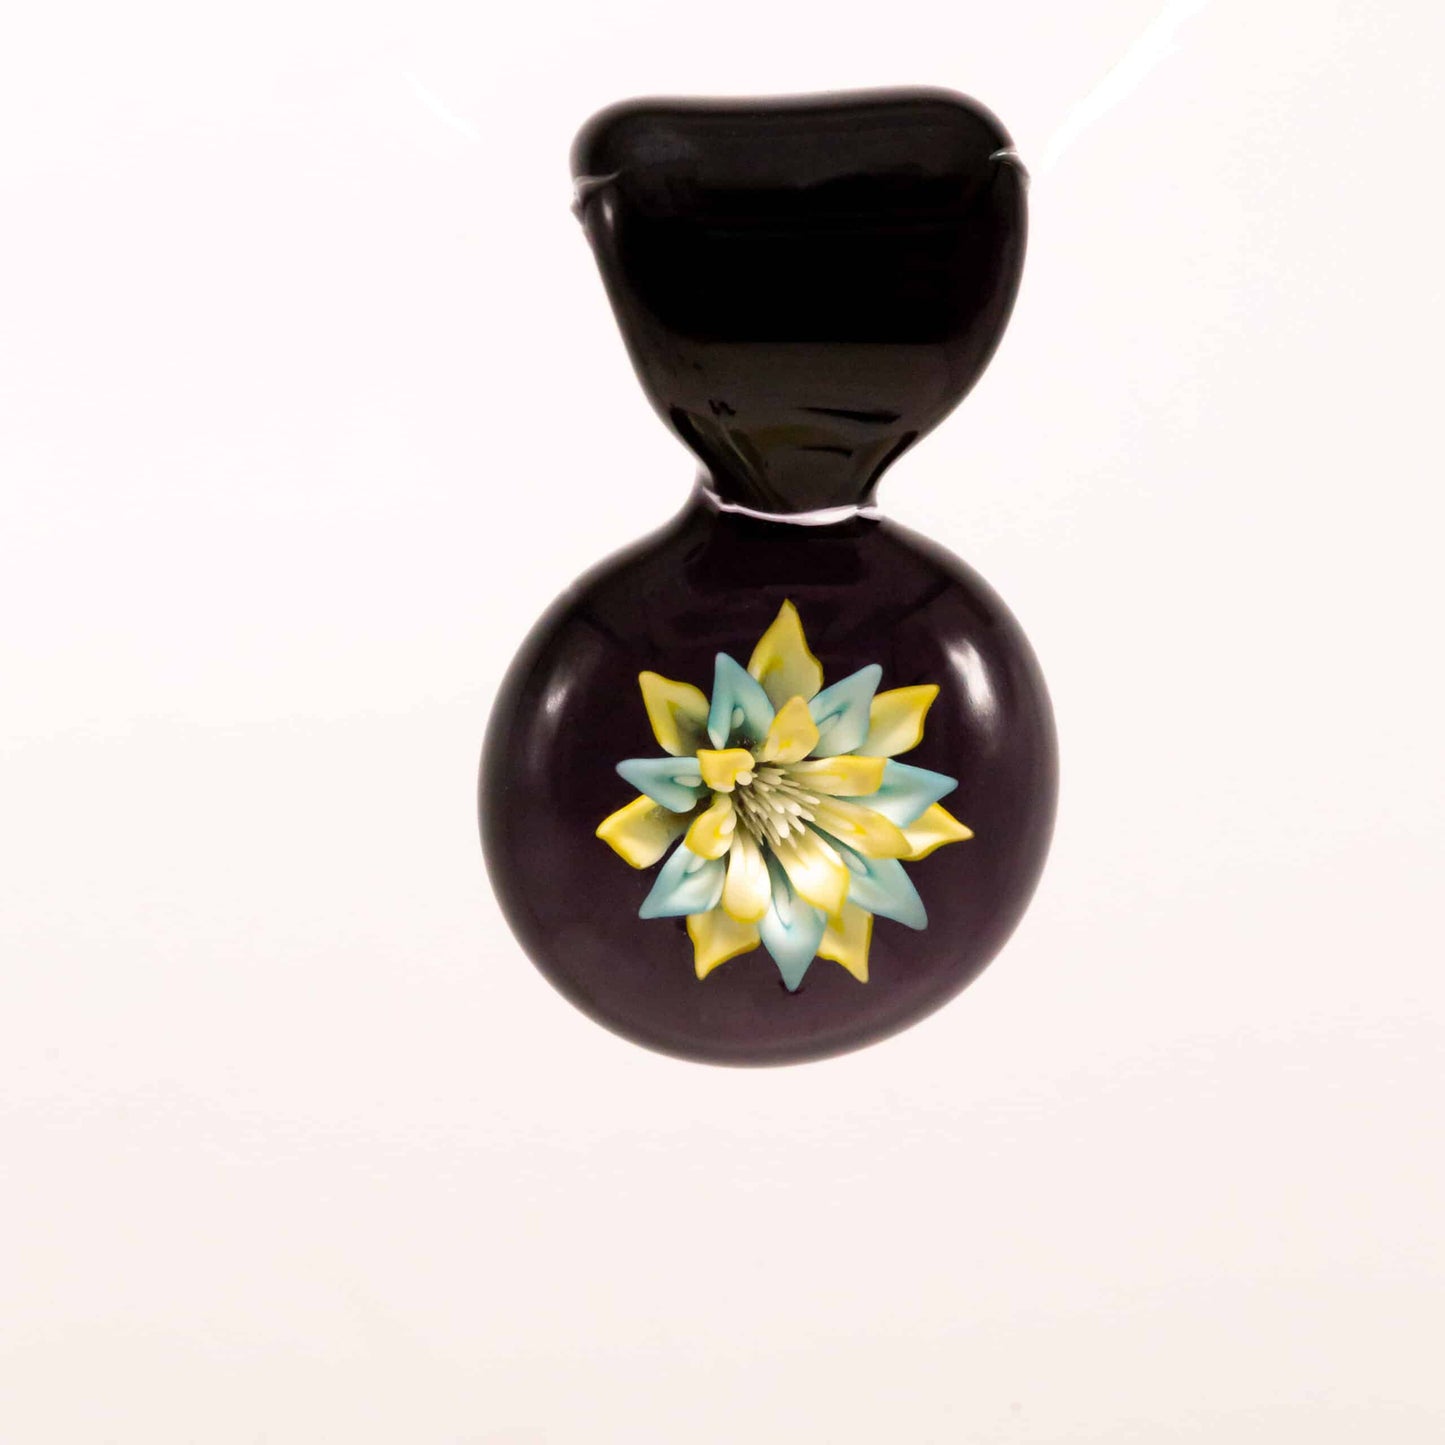 exquisite glass pendant - Flower Pendant #2 BY KIMMO (PURPLE, YELLOW, & BLUE )